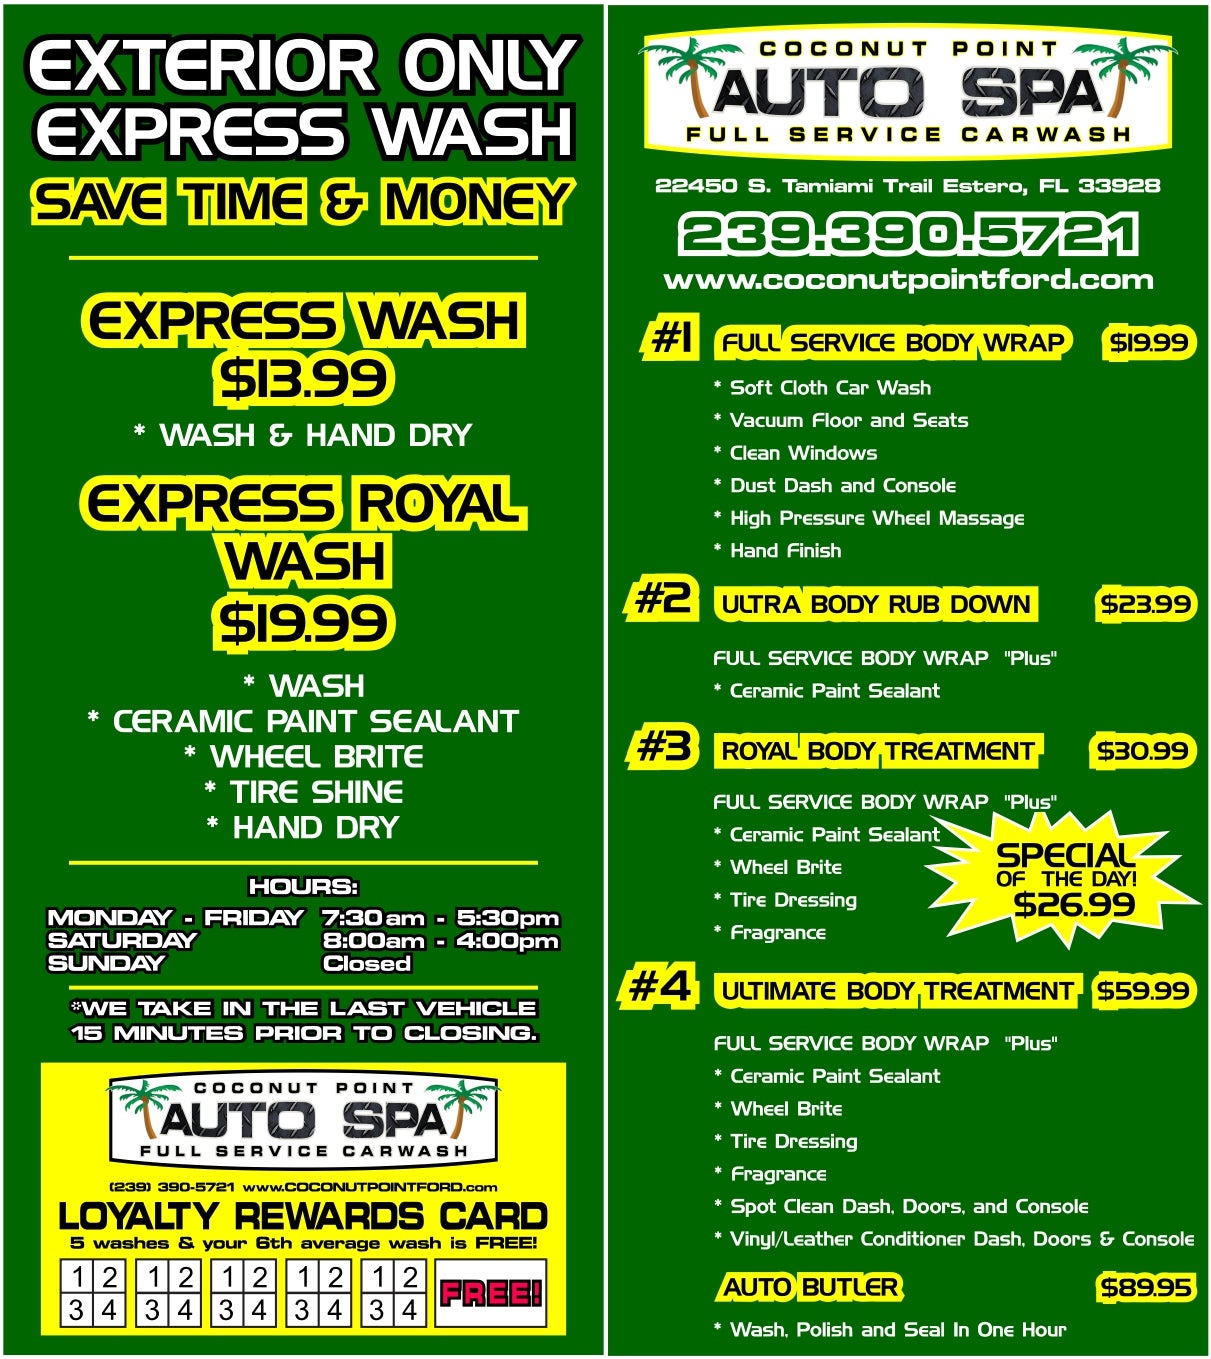 Coconut Point Ford Auto Spa Brochure